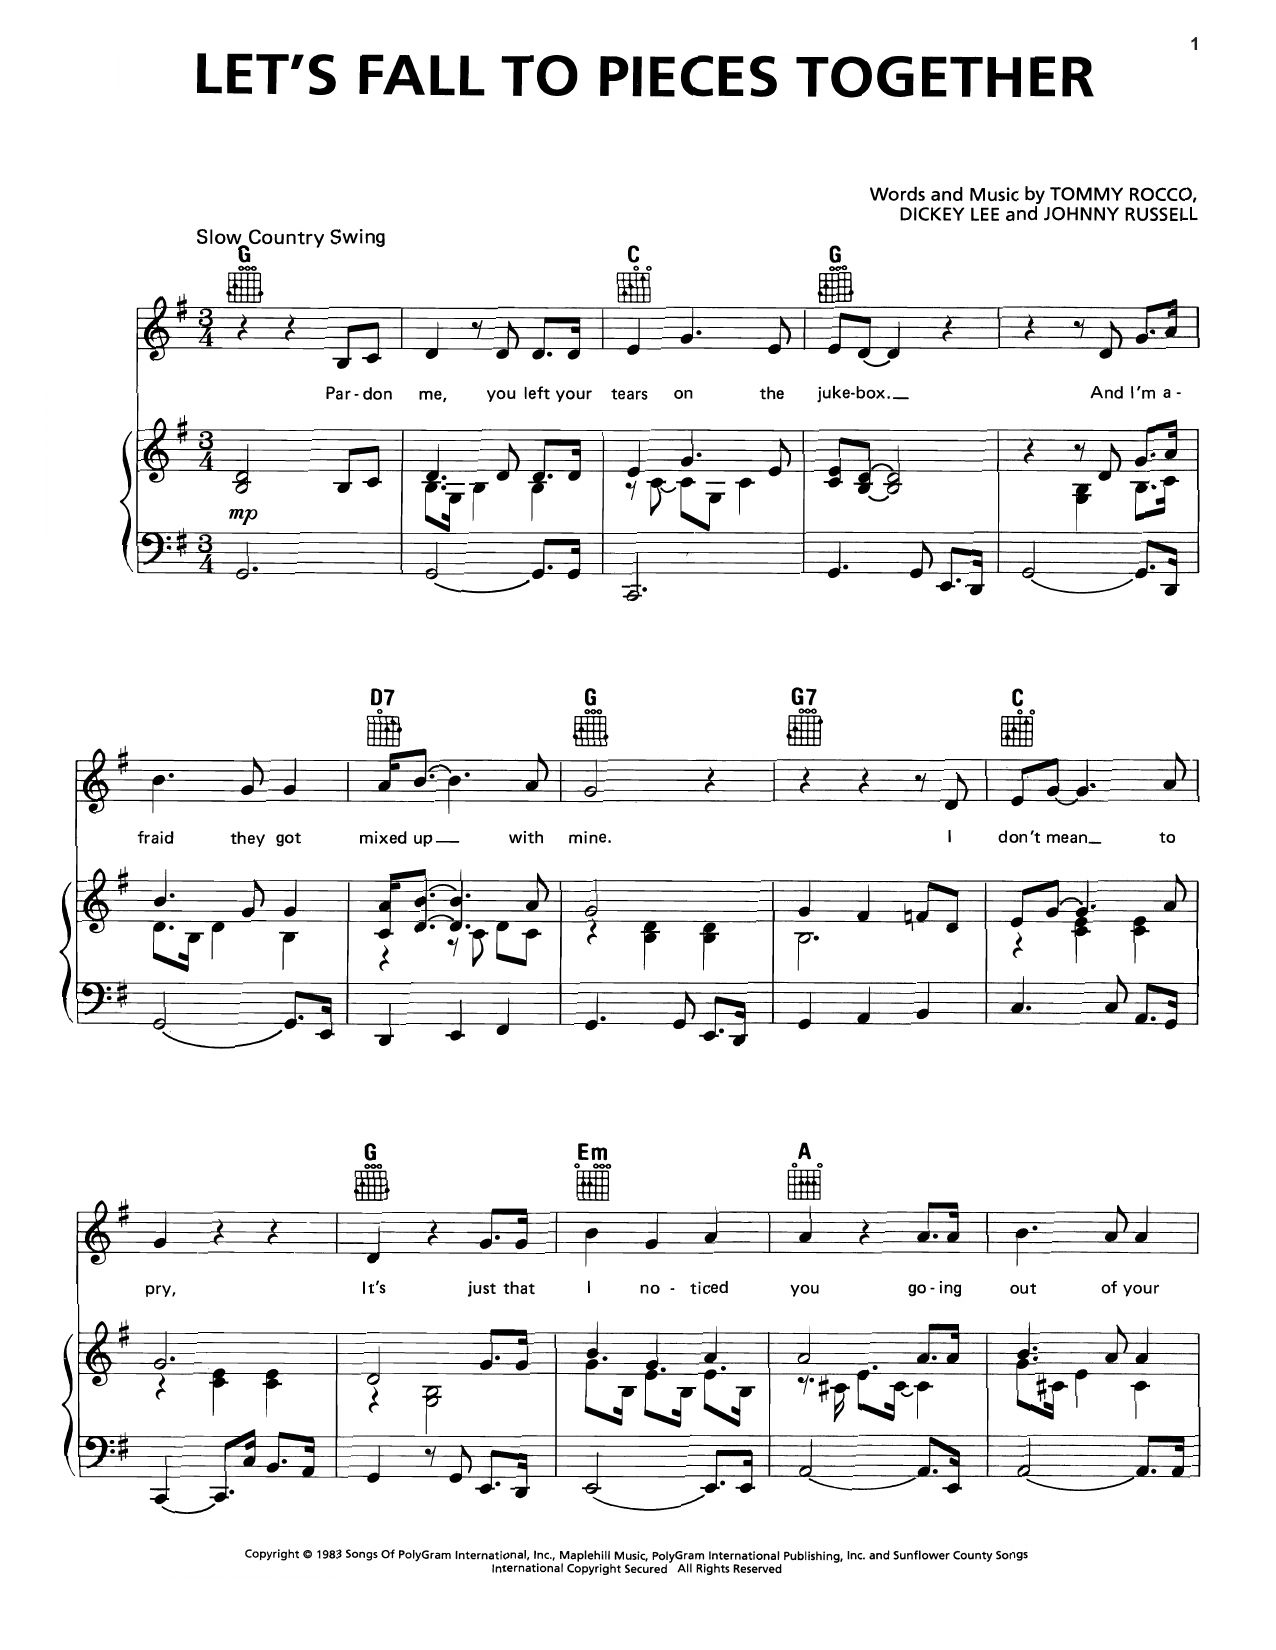 George Strait Let's Fall To Pieces Together sheet music notes and chords. Download Printable PDF.